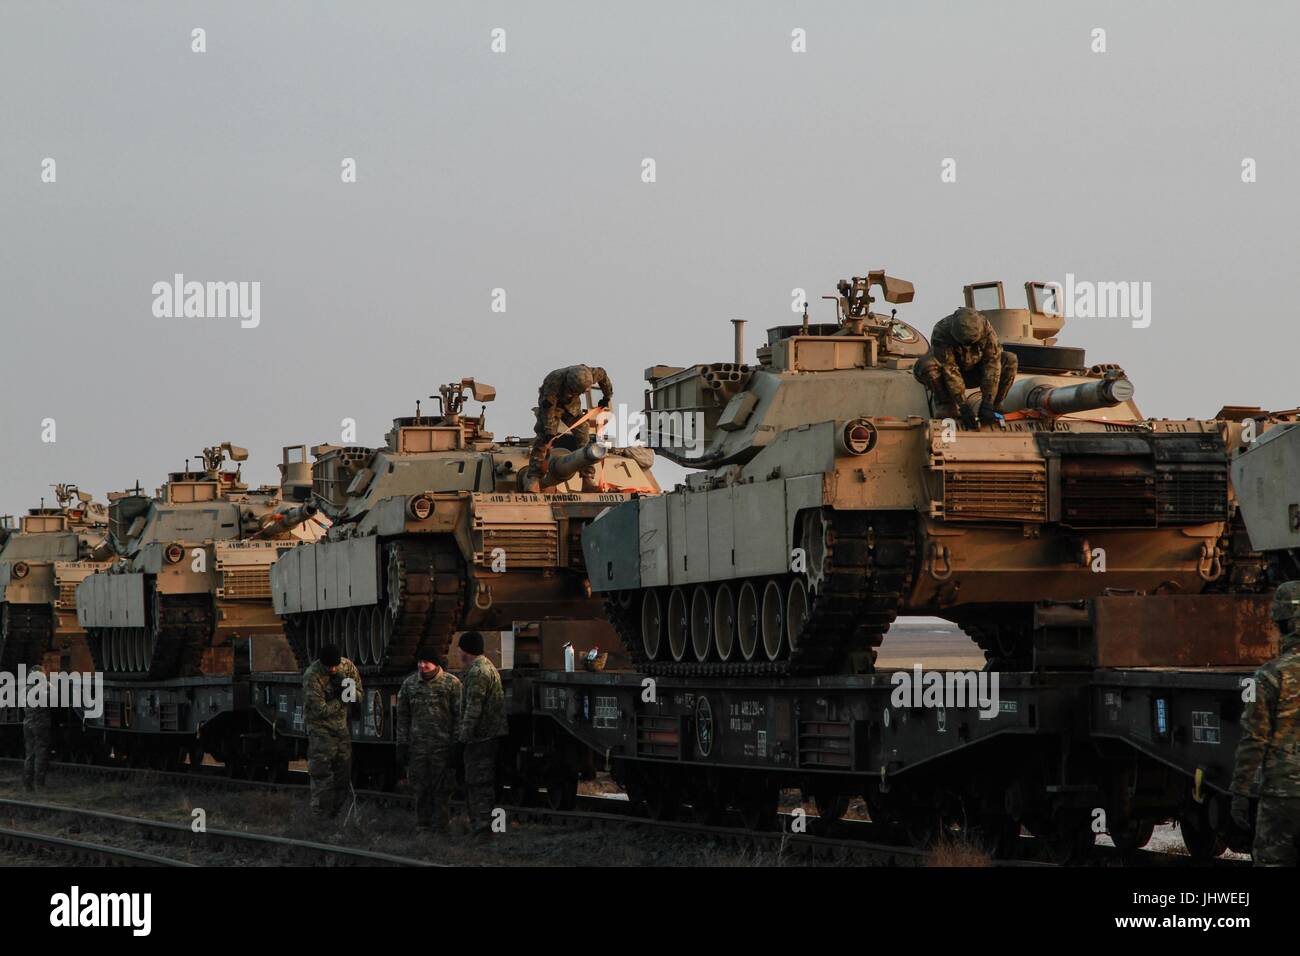 U.S. soldiers prep their battle tanks for offloading from rail cars at the Mihail Kogalniceanu Airbase February 14, 2017 in Mihail Kogalniceanu, Romania.    (photo by Devone Collins via Planetpix) Stock Photo